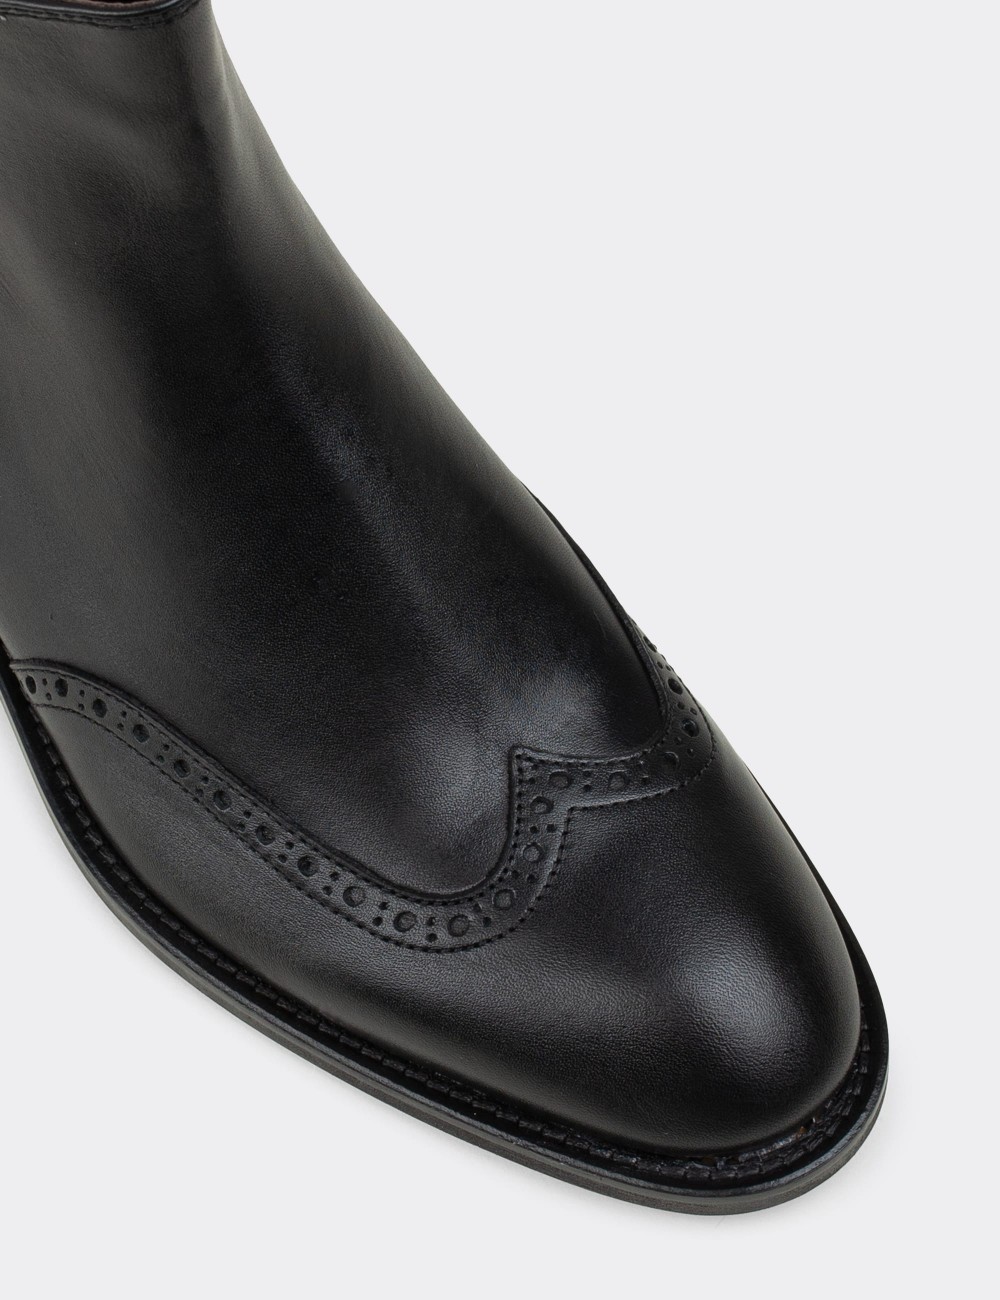 Black  Leather Chelsea Boots - 01816MSYHM02